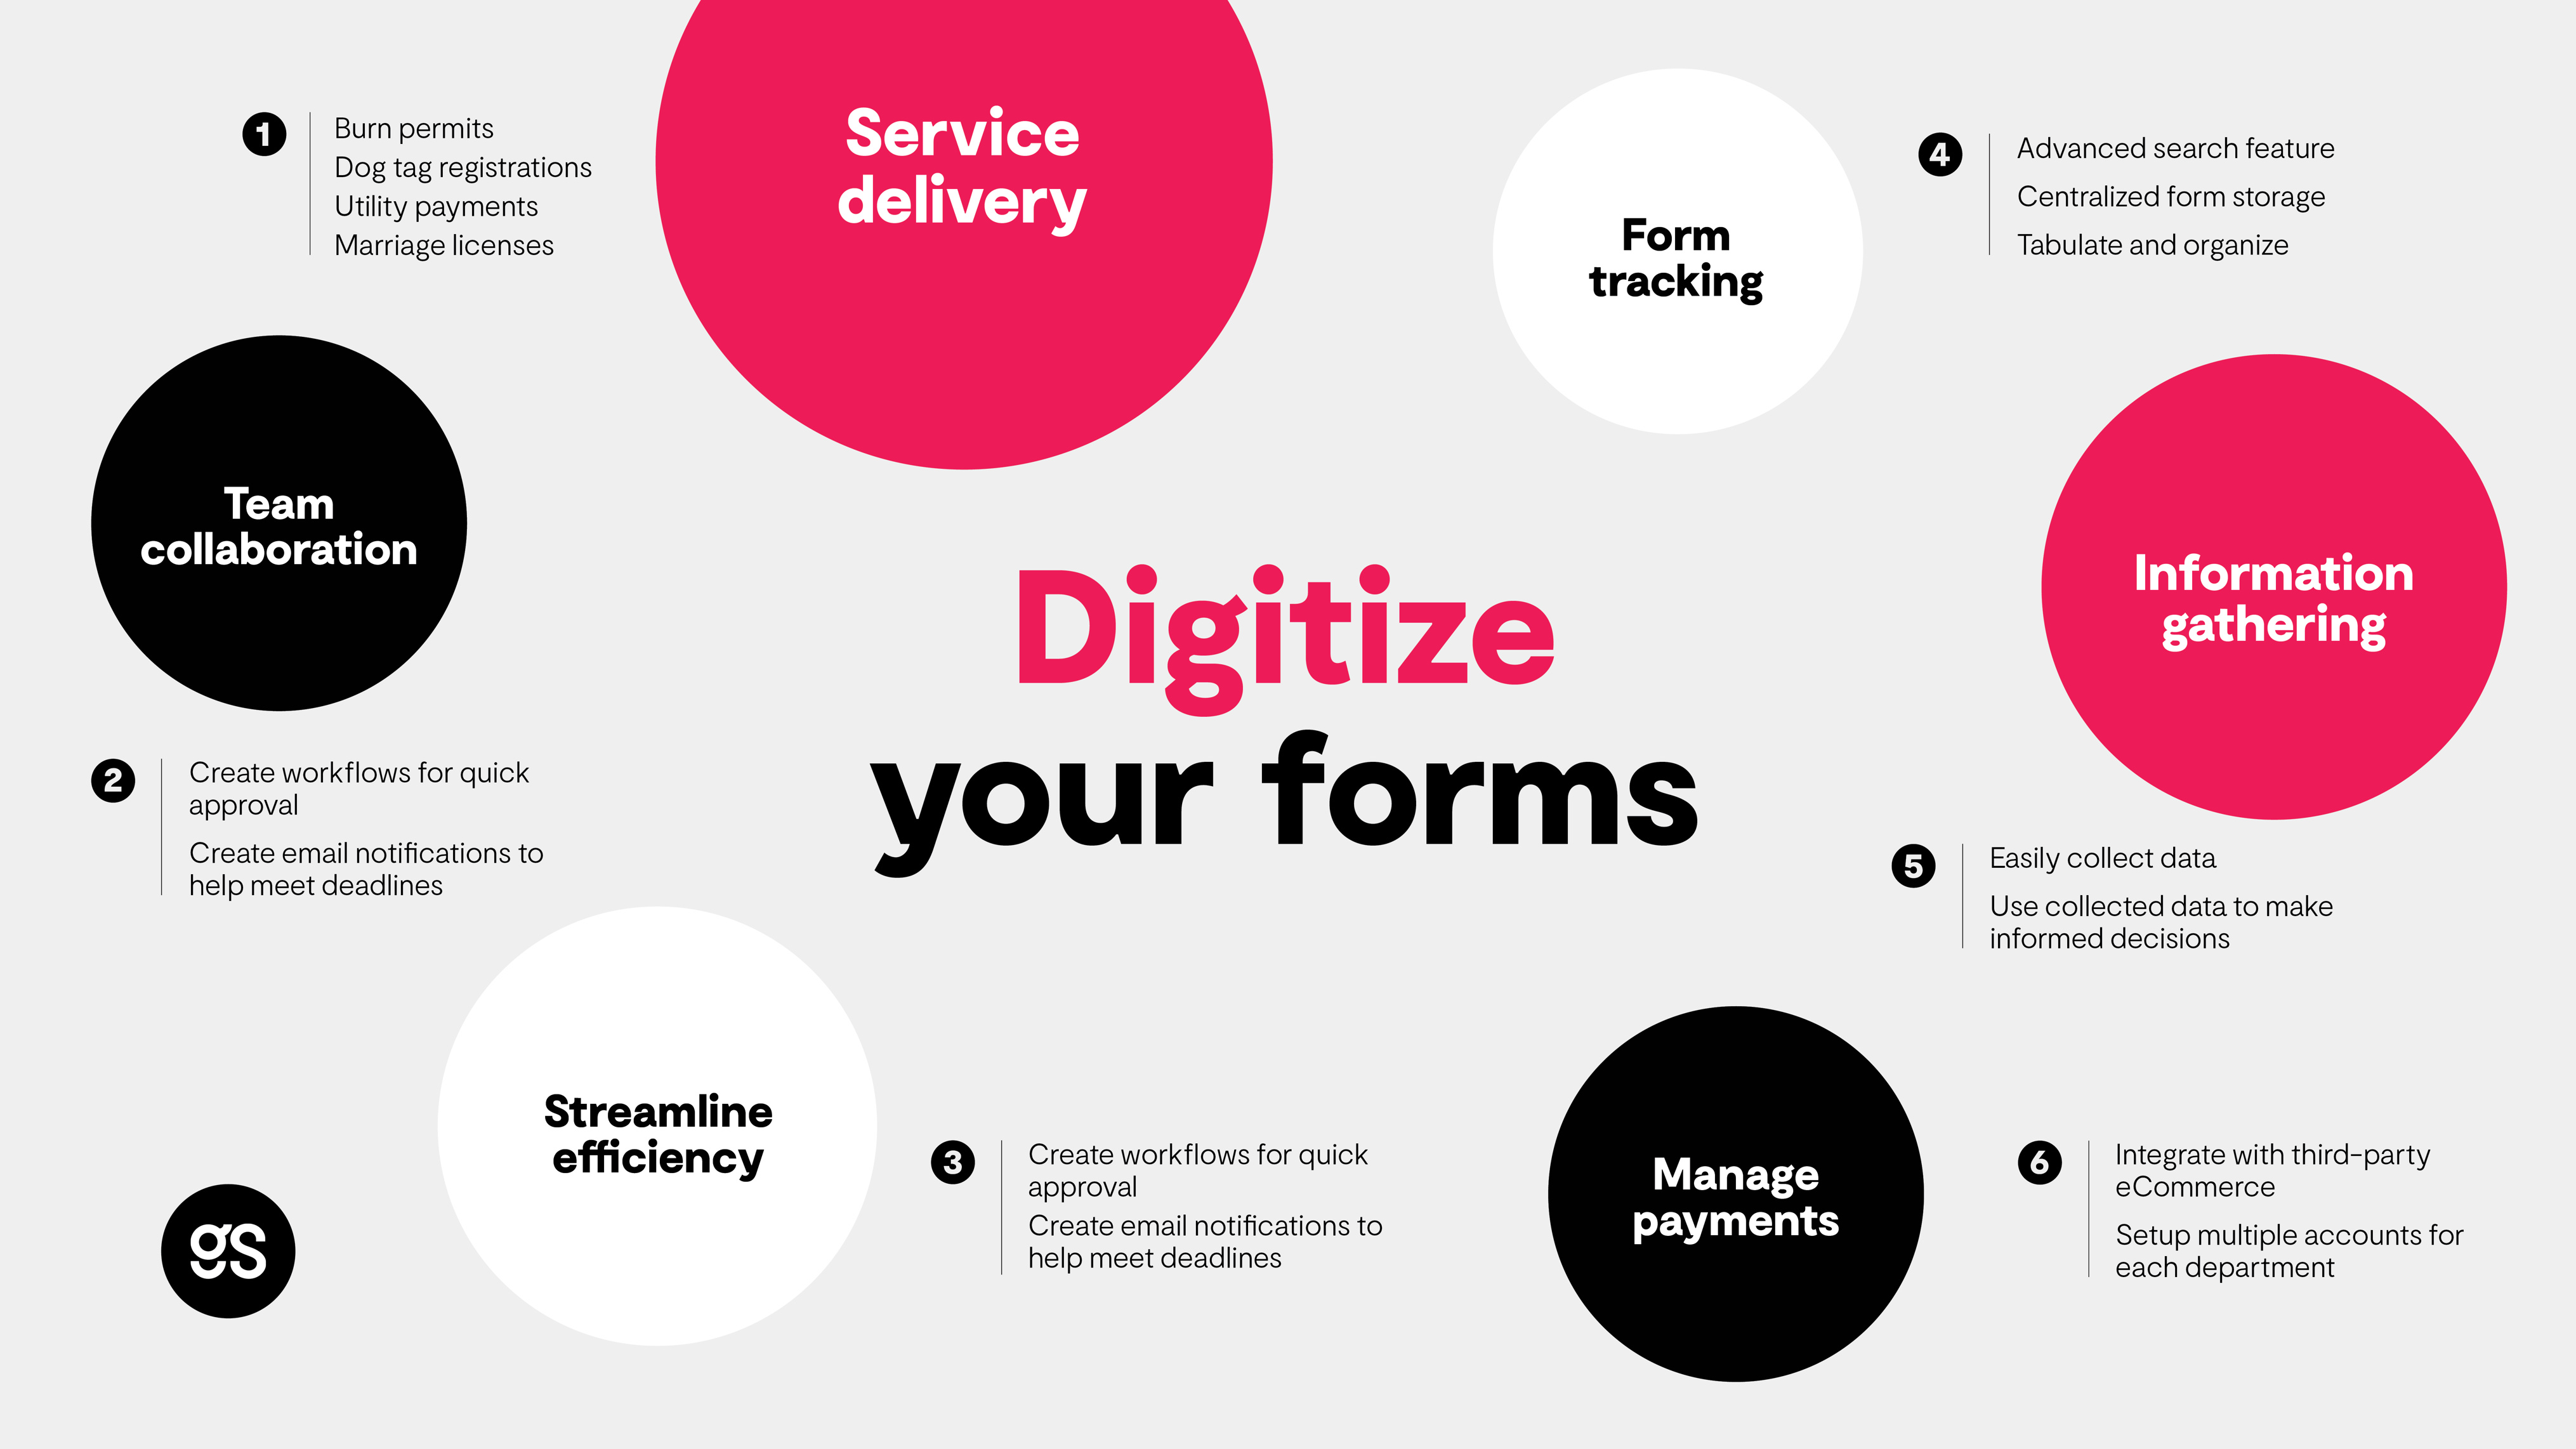 Digitize your forms